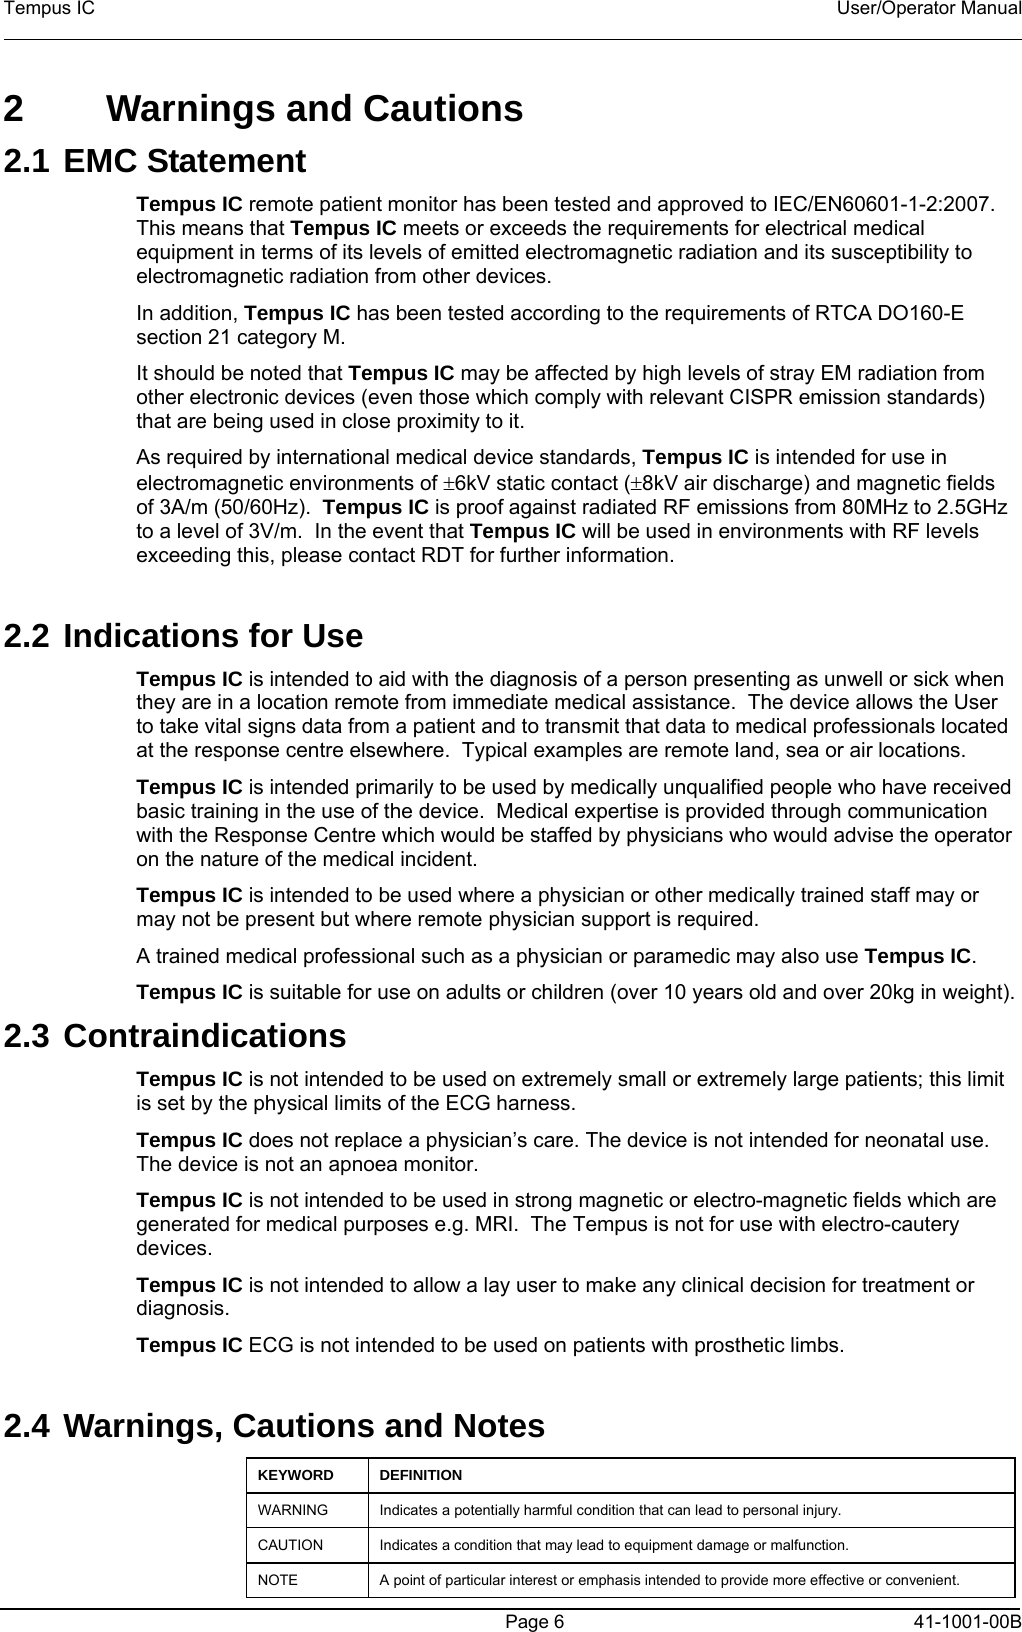 Tempus IC    User/Operator Manual     Page 6  41-1001-00B 2  Warnings and Cautions 2.1 EMC Statement Tempus IC remote patient monitor has been tested and approved to IEC/EN60601-1-2:2007.  This means that Tempus IC meets or exceeds the requirements for electrical medical equipment in terms of its levels of emitted electromagnetic radiation and its susceptibility to electromagnetic radiation from other devices. In addition, Tempus IC has been tested according to the requirements of RTCA DO160-E section 21 category M. It should be noted that Tempus IC may be affected by high levels of stray EM radiation from other electronic devices (even those which comply with relevant CISPR emission standards) that are being used in close proximity to it.   As required by international medical device standards, Tempus IC is intended for use in electromagnetic environments of ±6kV static contact (±8kV air discharge) and magnetic fields of 3A/m (50/60Hz).  Tempus IC is proof against radiated RF emissions from 80MHz to 2.5GHz to a level of 3V/m.  In the event that Tempus IC will be used in environments with RF levels exceeding this, please contact RDT for further information.  2.2 Indications for Use Tempus IC is intended to aid with the diagnosis of a person presenting as unwell or sick when they are in a location remote from immediate medical assistance.  The device allows the User to take vital signs data from a patient and to transmit that data to medical professionals located at the response centre elsewhere.  Typical examples are remote land, sea or air locations.   Tempus IC is intended primarily to be used by medically unqualified people who have received basic training in the use of the device.  Medical expertise is provided through communication with the Response Centre which would be staffed by physicians who would advise the operator on the nature of the medical incident.   Tempus IC is intended to be used where a physician or other medically trained staff may or may not be present but where remote physician support is required. A trained medical professional such as a physician or paramedic may also use Tempus IC. Tempus IC is suitable for use on adults or children (over 10 years old and over 20kg in weight). 2.3 Contraindications Tempus IC is not intended to be used on extremely small or extremely large patients; this limit is set by the physical limits of the ECG harness. Tempus IC does not replace a physician’s care. The device is not intended for neonatal use. The device is not an apnoea monitor.   Tempus IC is not intended to be used in strong magnetic or electro-magnetic fields which are generated for medical purposes e.g. MRI.  The Tempus is not for use with electro-cautery devices. Tempus IC is not intended to allow a lay user to make any clinical decision for treatment or diagnosis.   Tempus IC ECG is not intended to be used on patients with prosthetic limbs.  2.4 Warnings, Cautions and Notes KEYWORD DEFINITION WARNING Indicates a potentially harmful condition that can lead to personal injury.  CAUTION Indicates a condition that may lead to equipment damage or malfunction.  NOTE A point of particular interest or emphasis intended to provide more effective or convenient.  